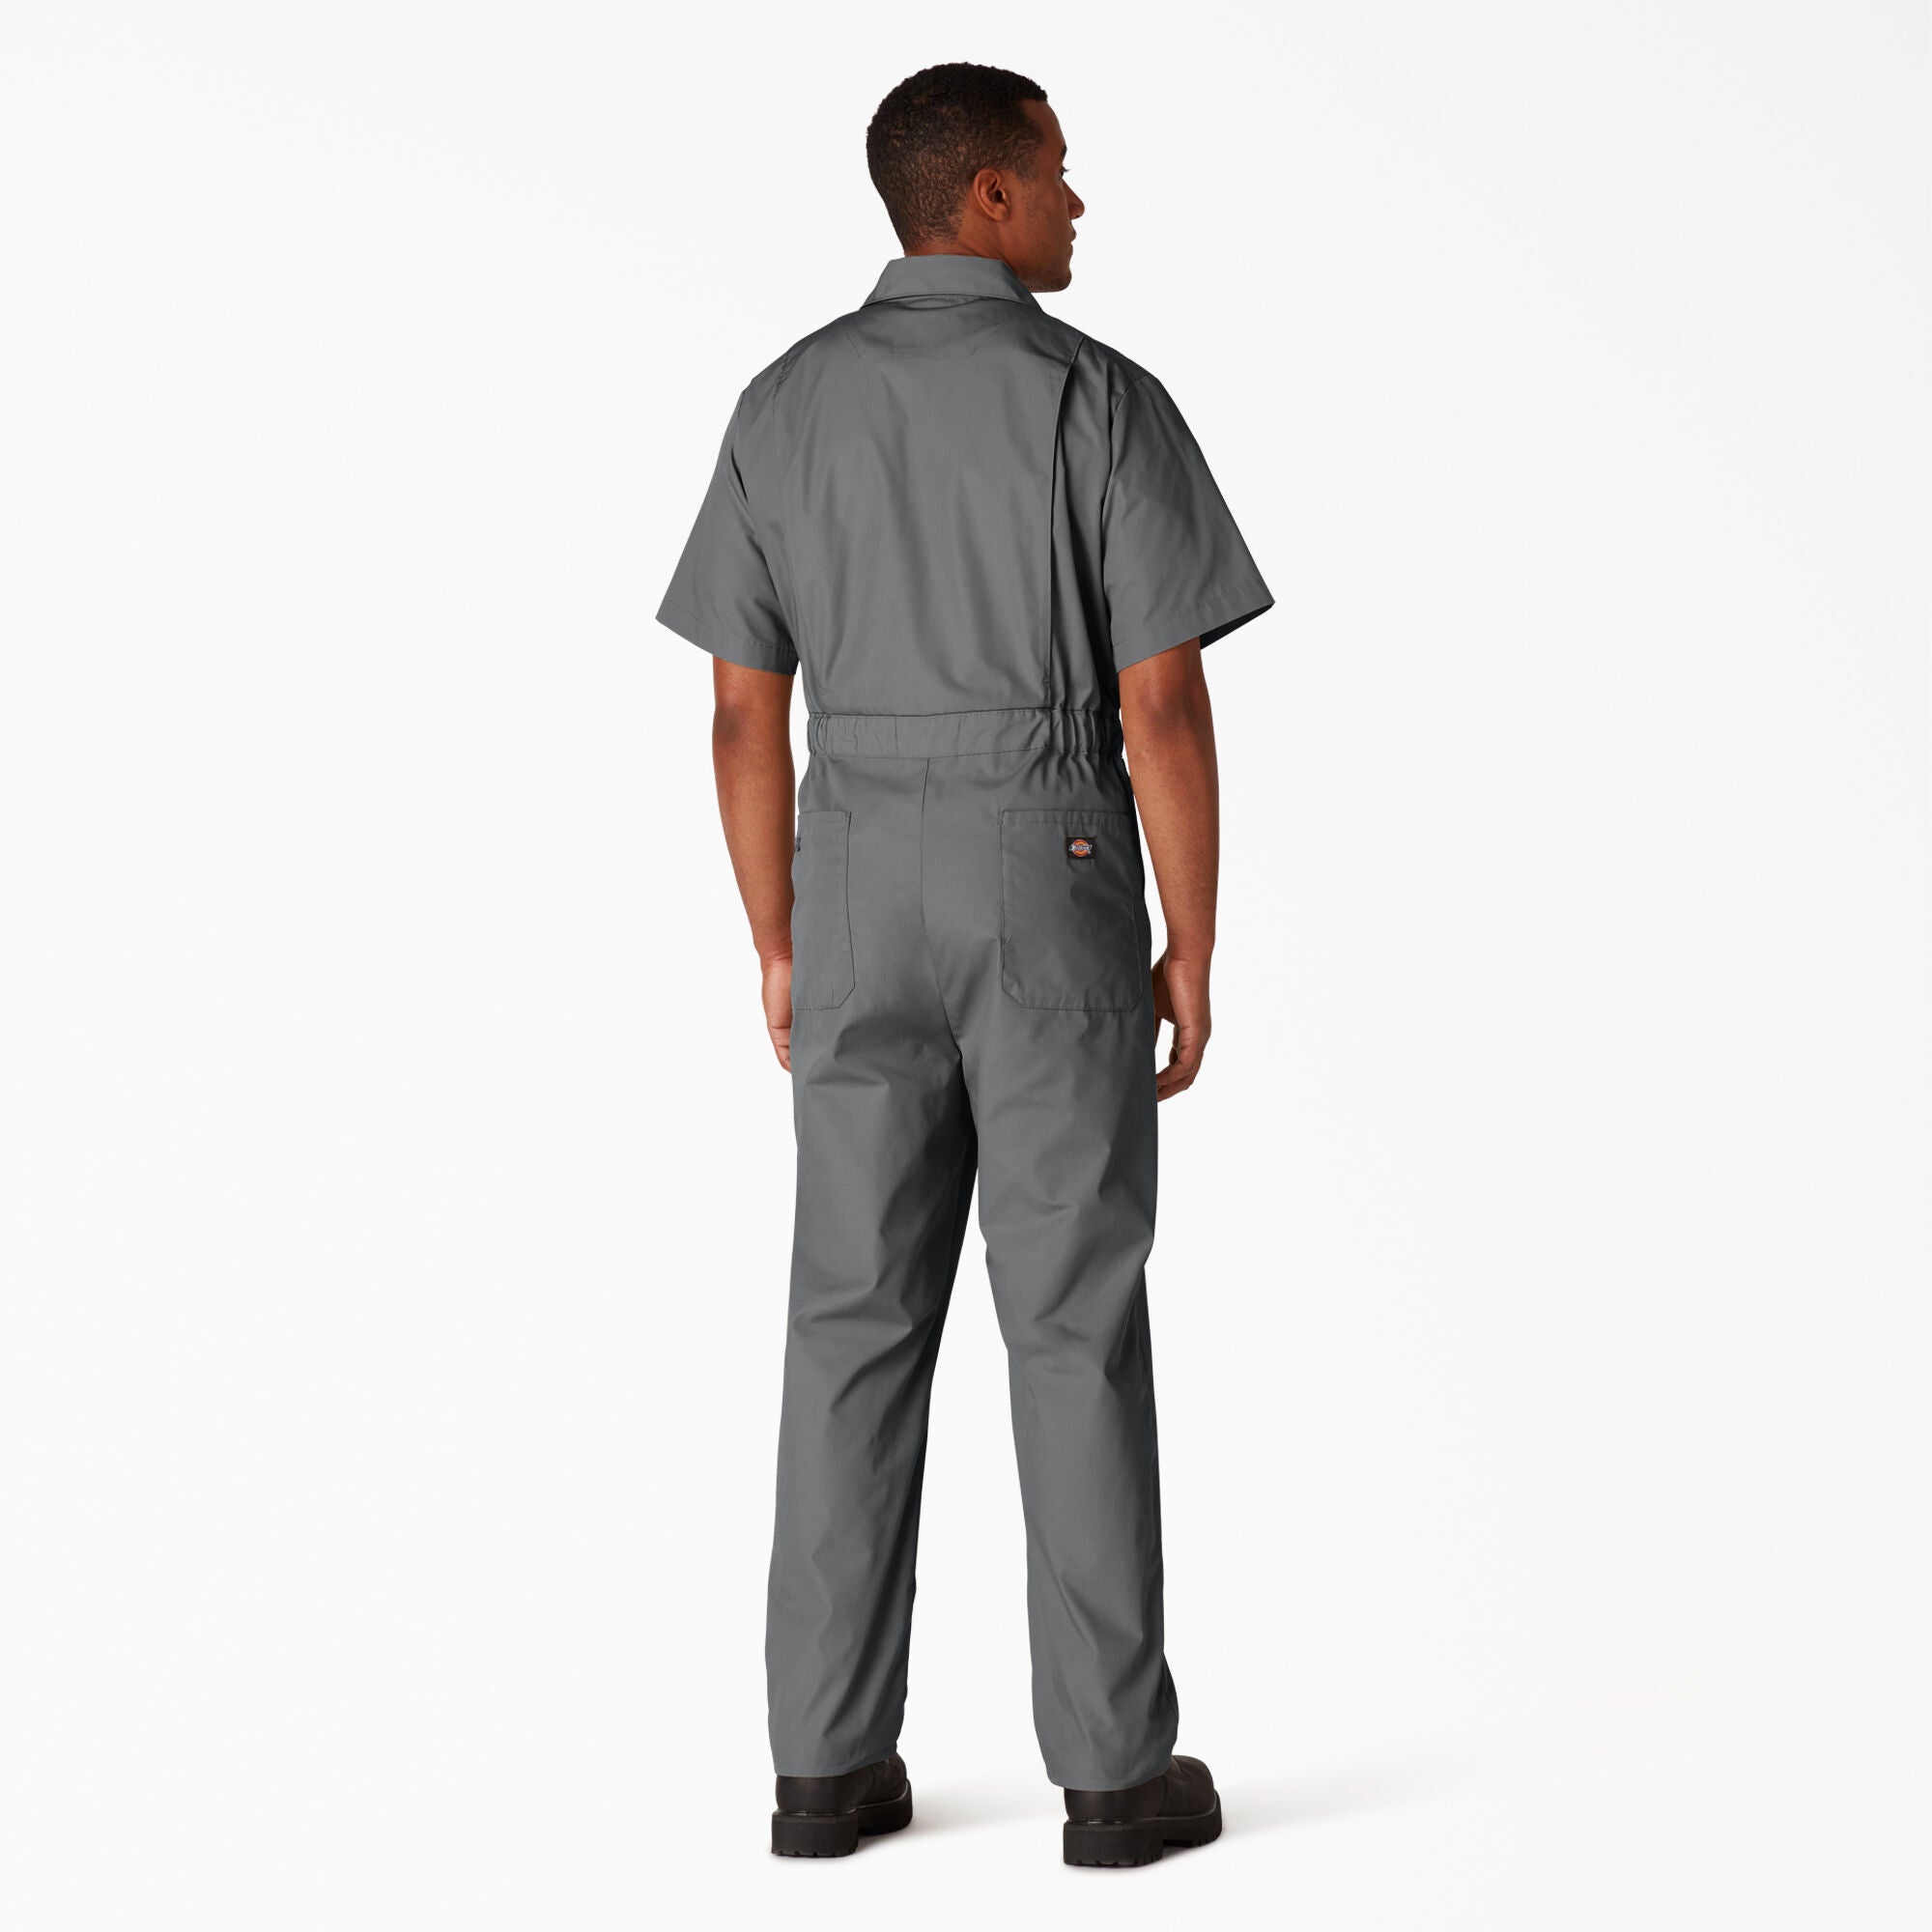 Dickies Men's Short Sleeve Coveralls Gray 33999GY